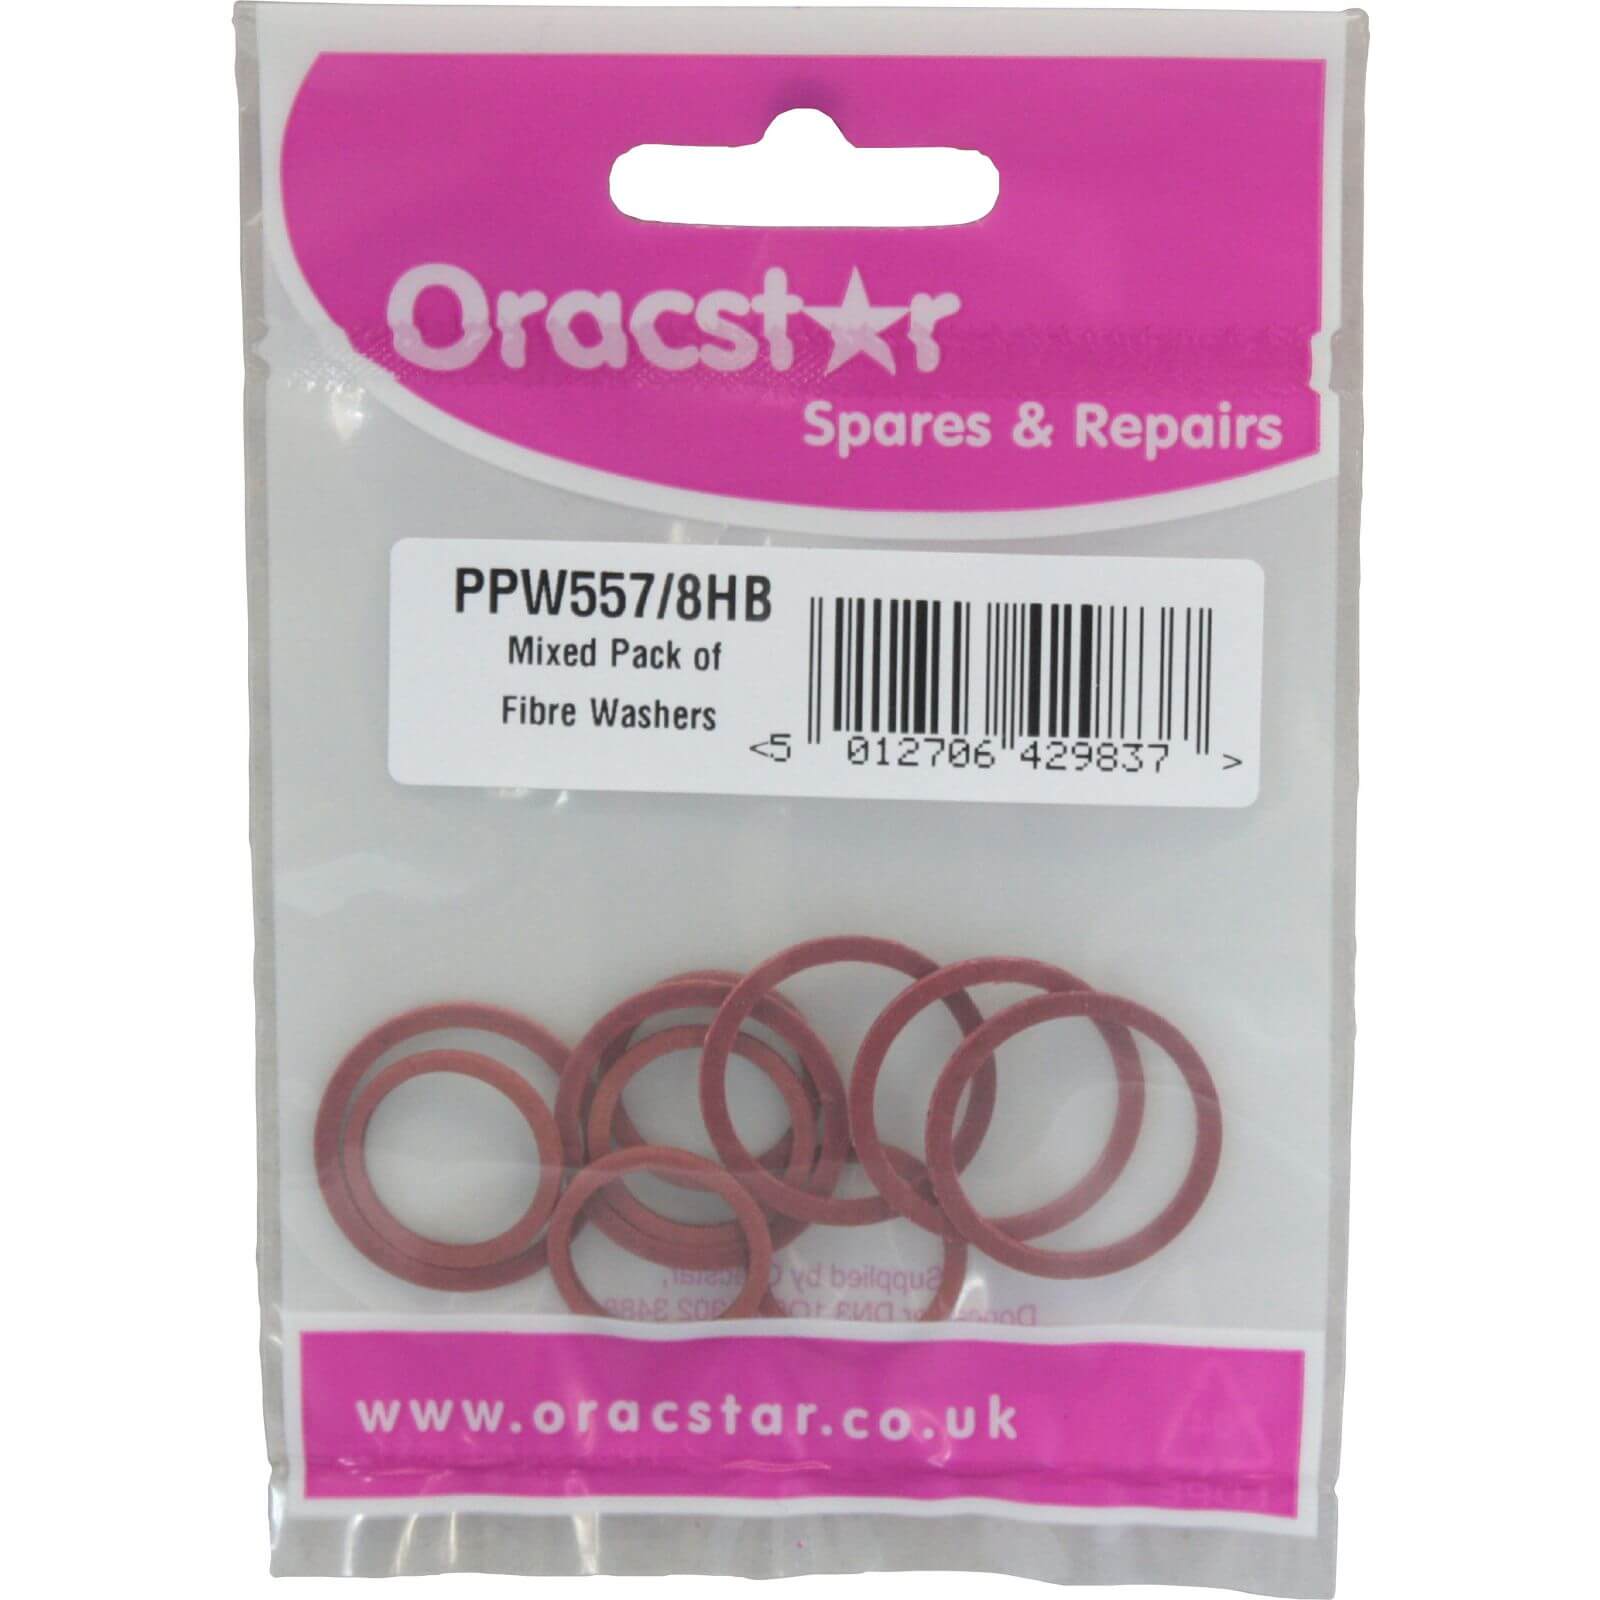 Oracstar Mixed Pack of Fibre Washers